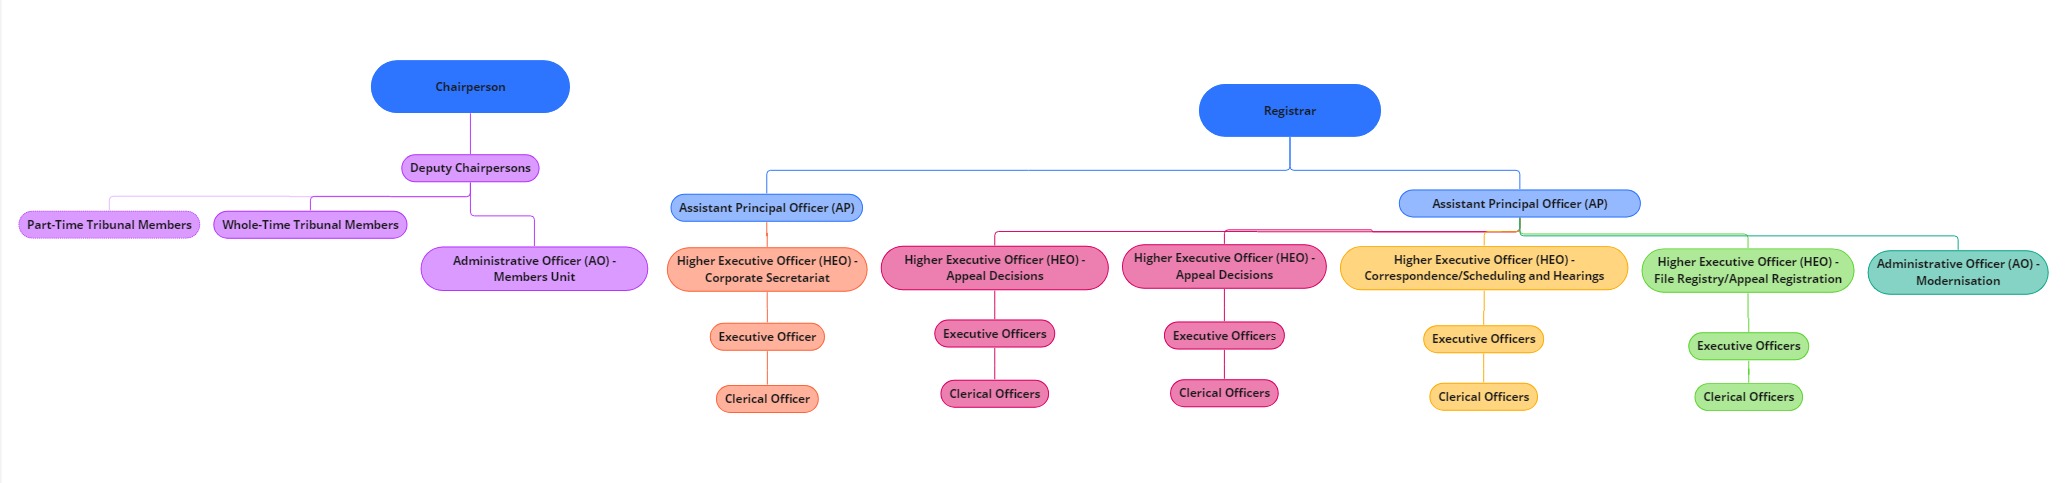 The International Protection Tribunal's Organisational Structure